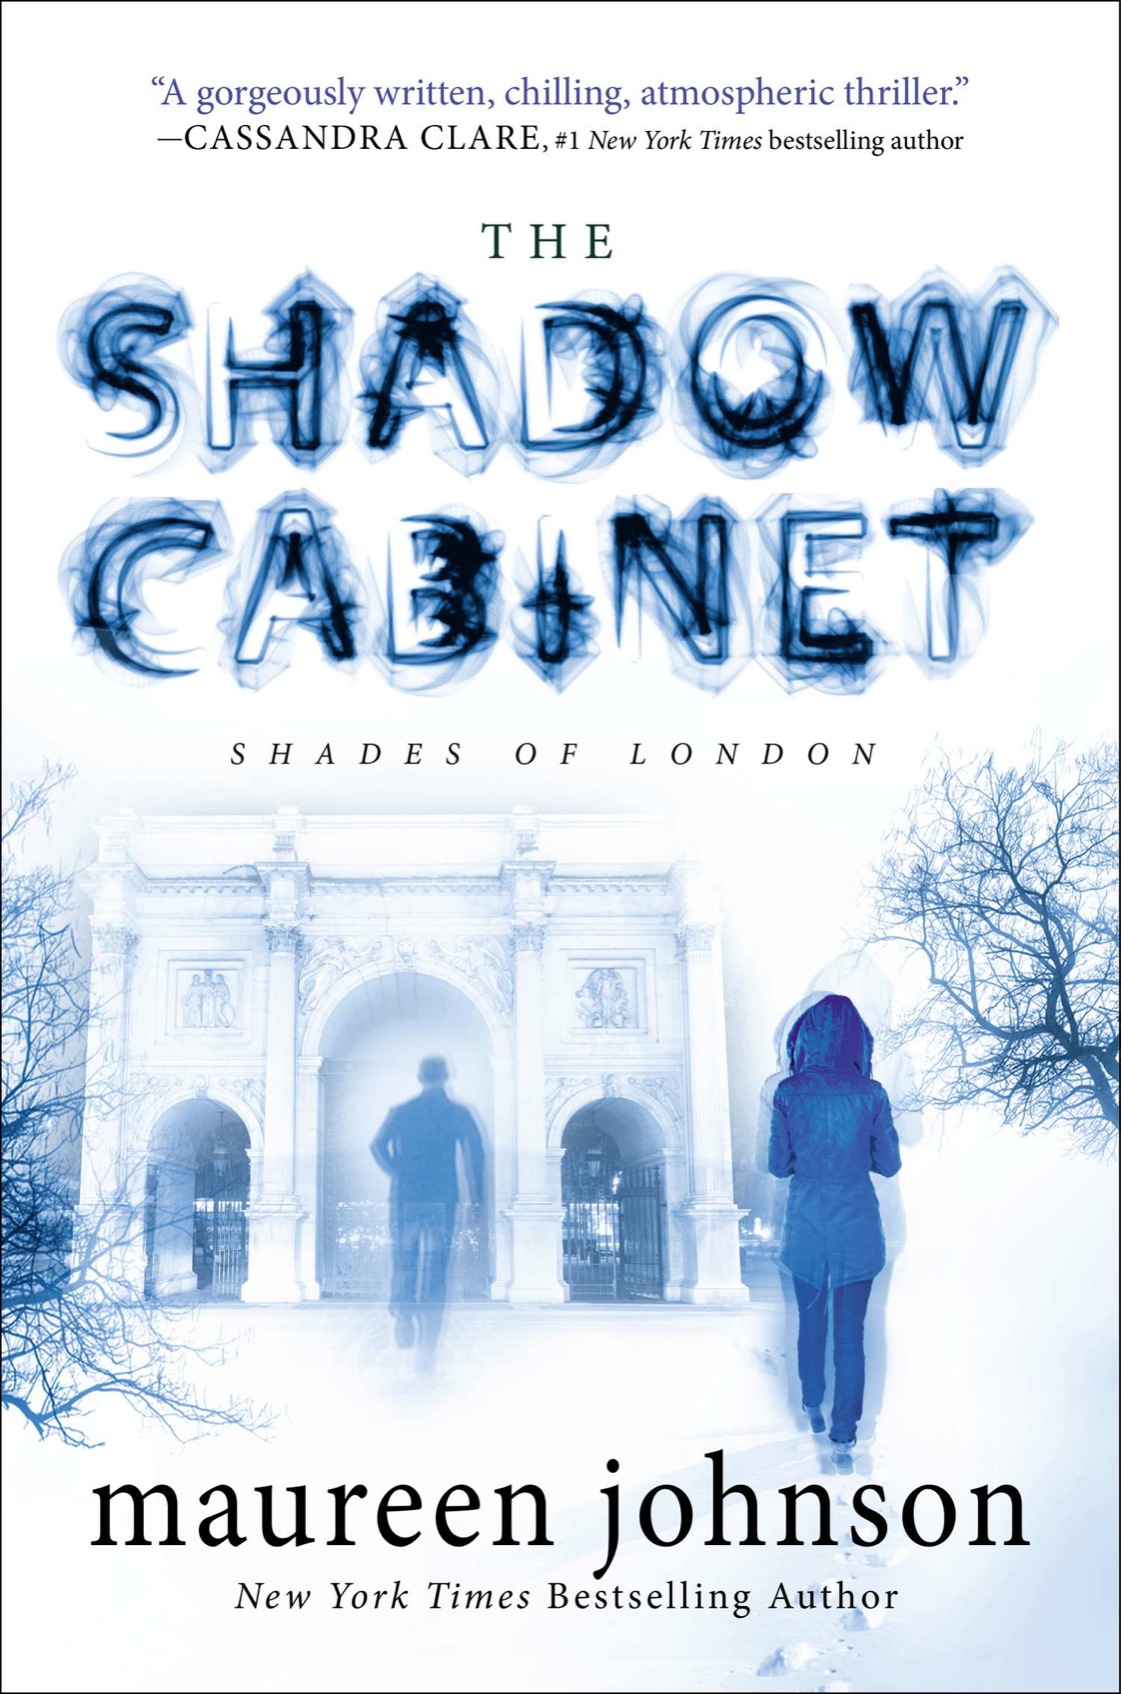 The Shadow Cabinet (2015) by Maureen Johnson